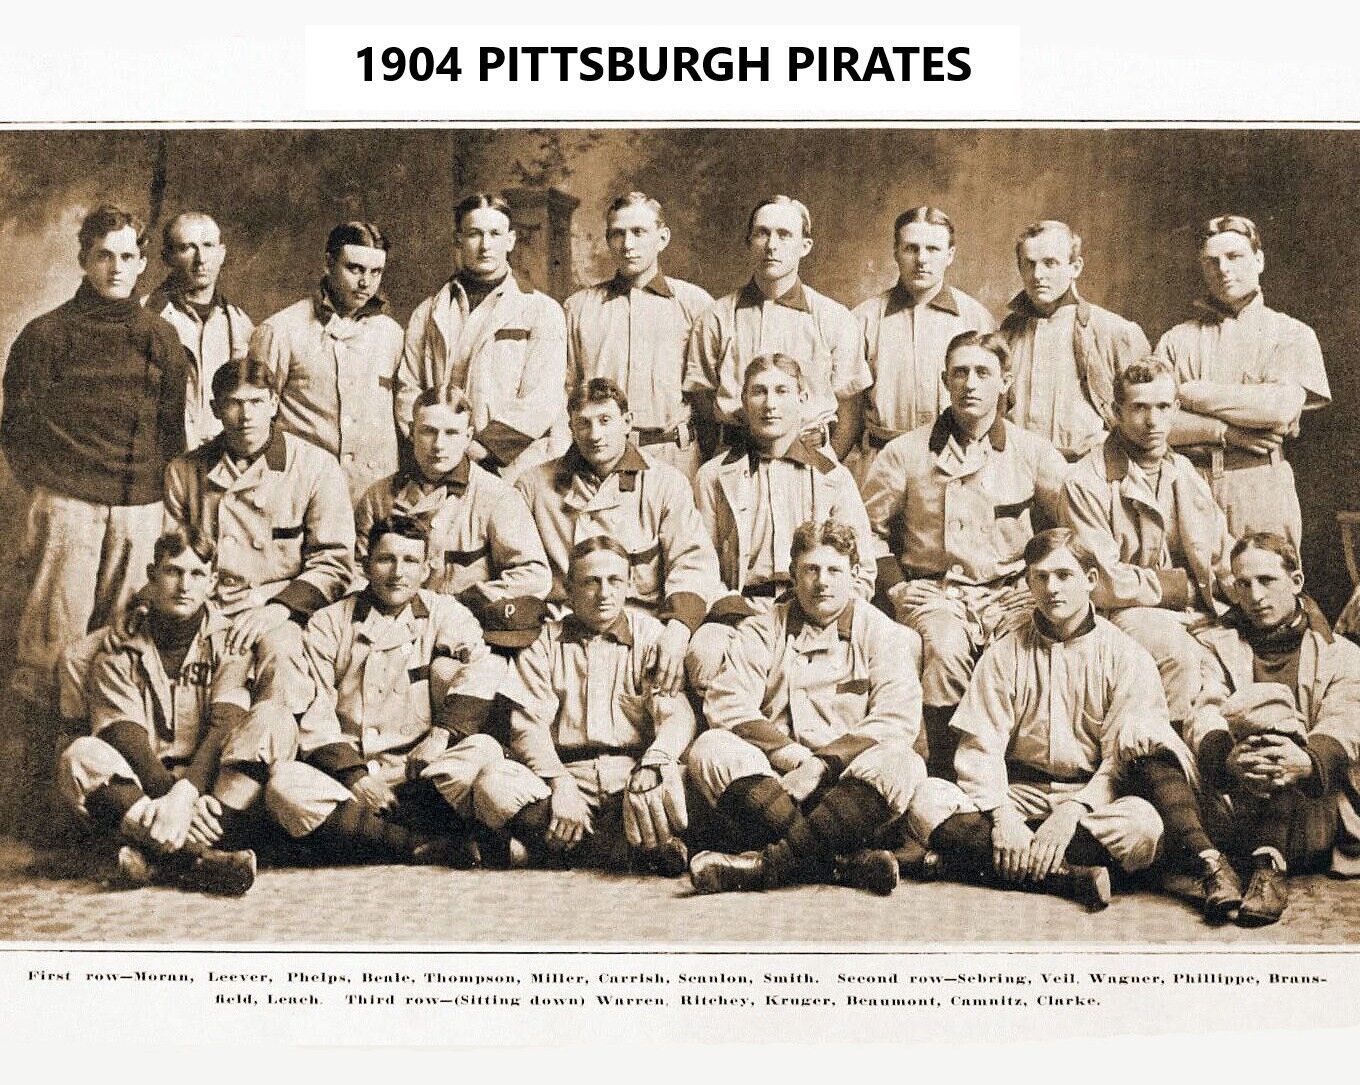 Primary image for 1904 PITTSBURGH PIRATES 8X10 TEAM PHOTO BASEBALL MLB PICTURE WITH NAMES